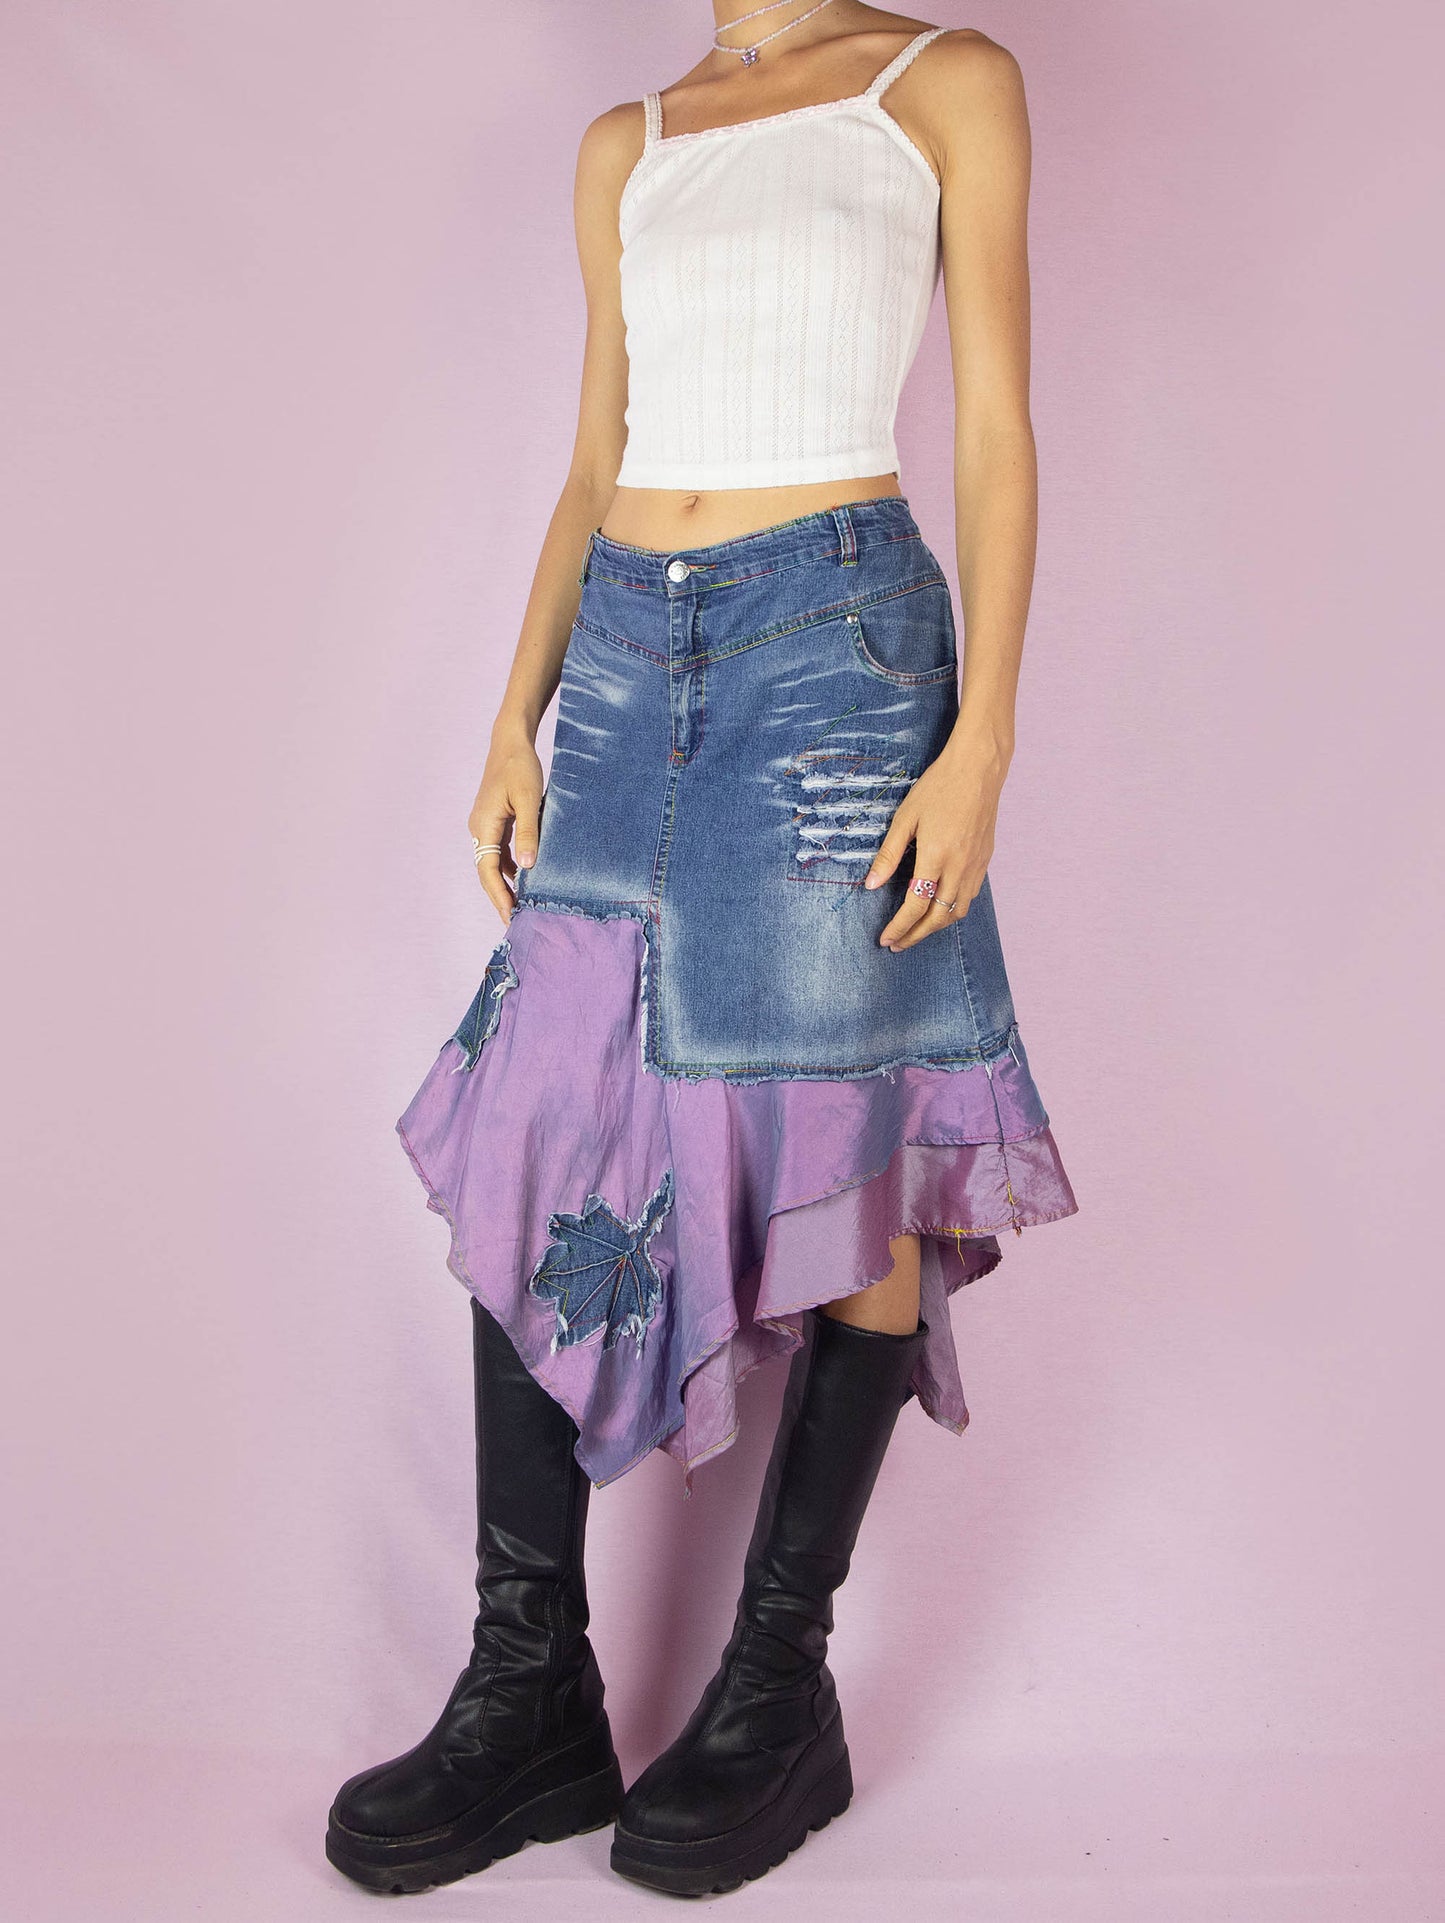 The Y2K Denim Asymmetric Trumpet Skirt is a vintage 2000s slightly stretchy jean midi skirt, avant-garde and deconstructed, with applique and acid wash details, a layered pointed hem, pockets, and a zipper closure.